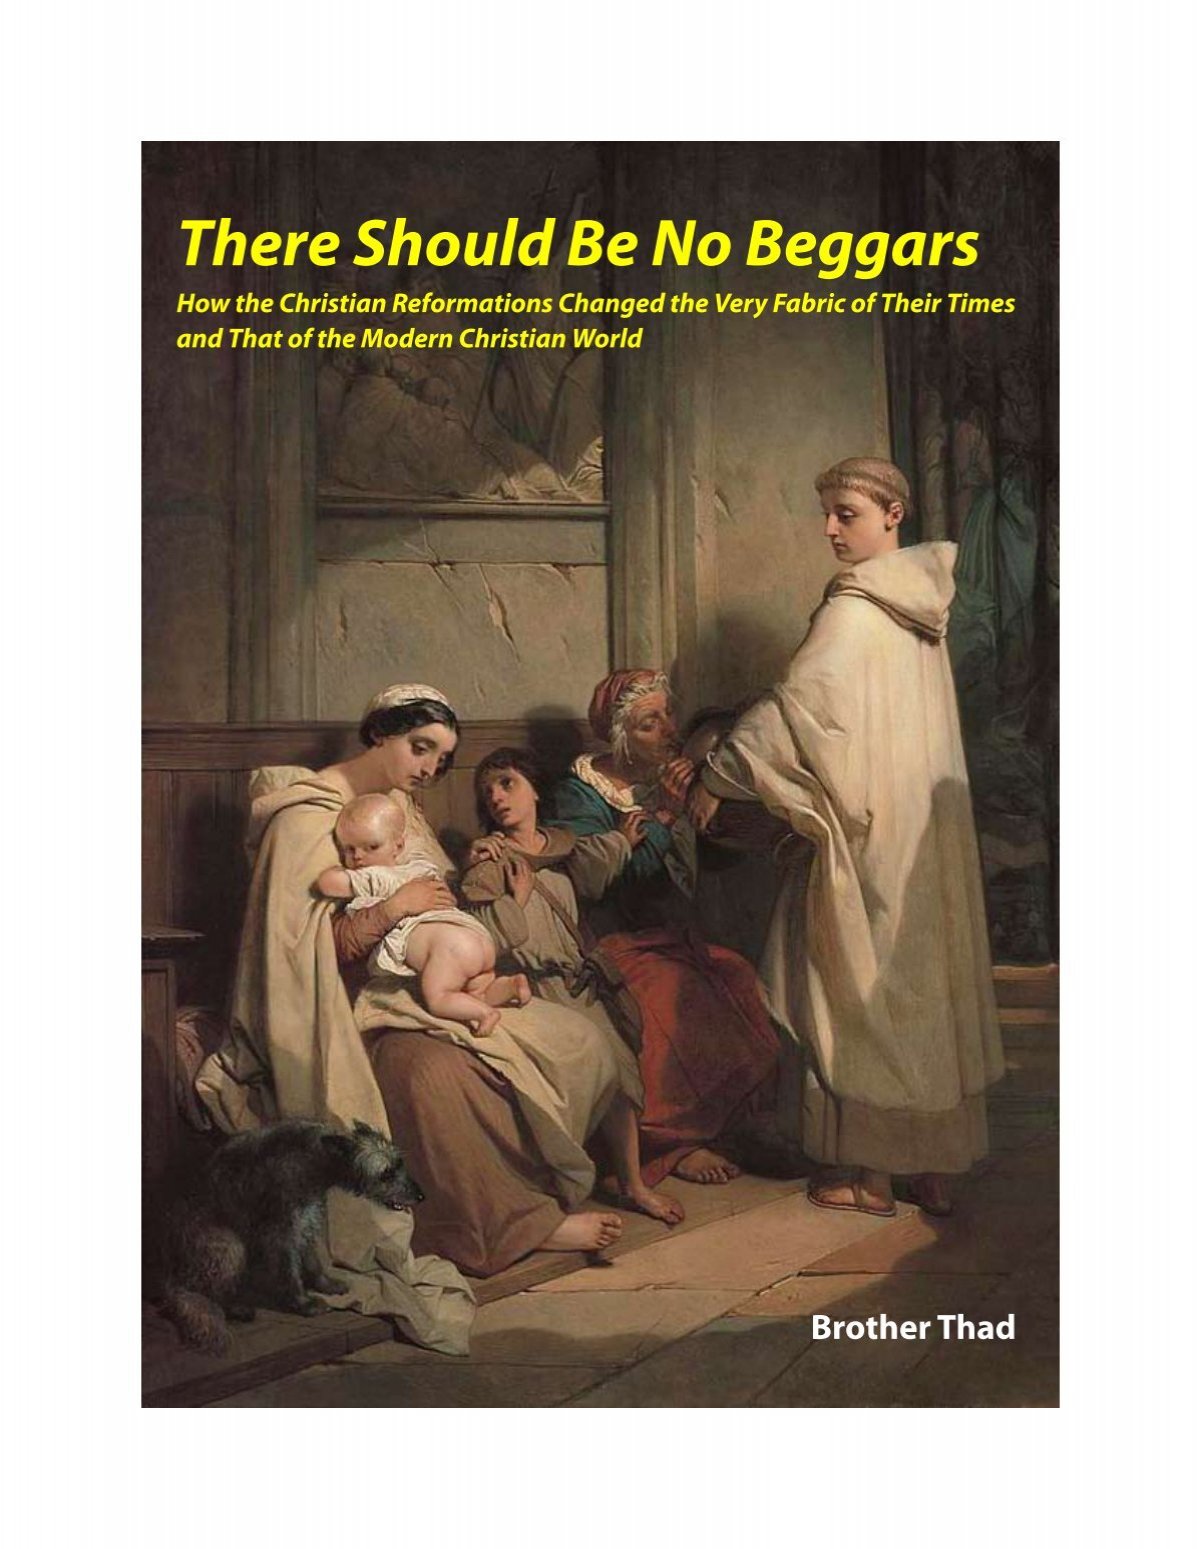 book there should be no beggars